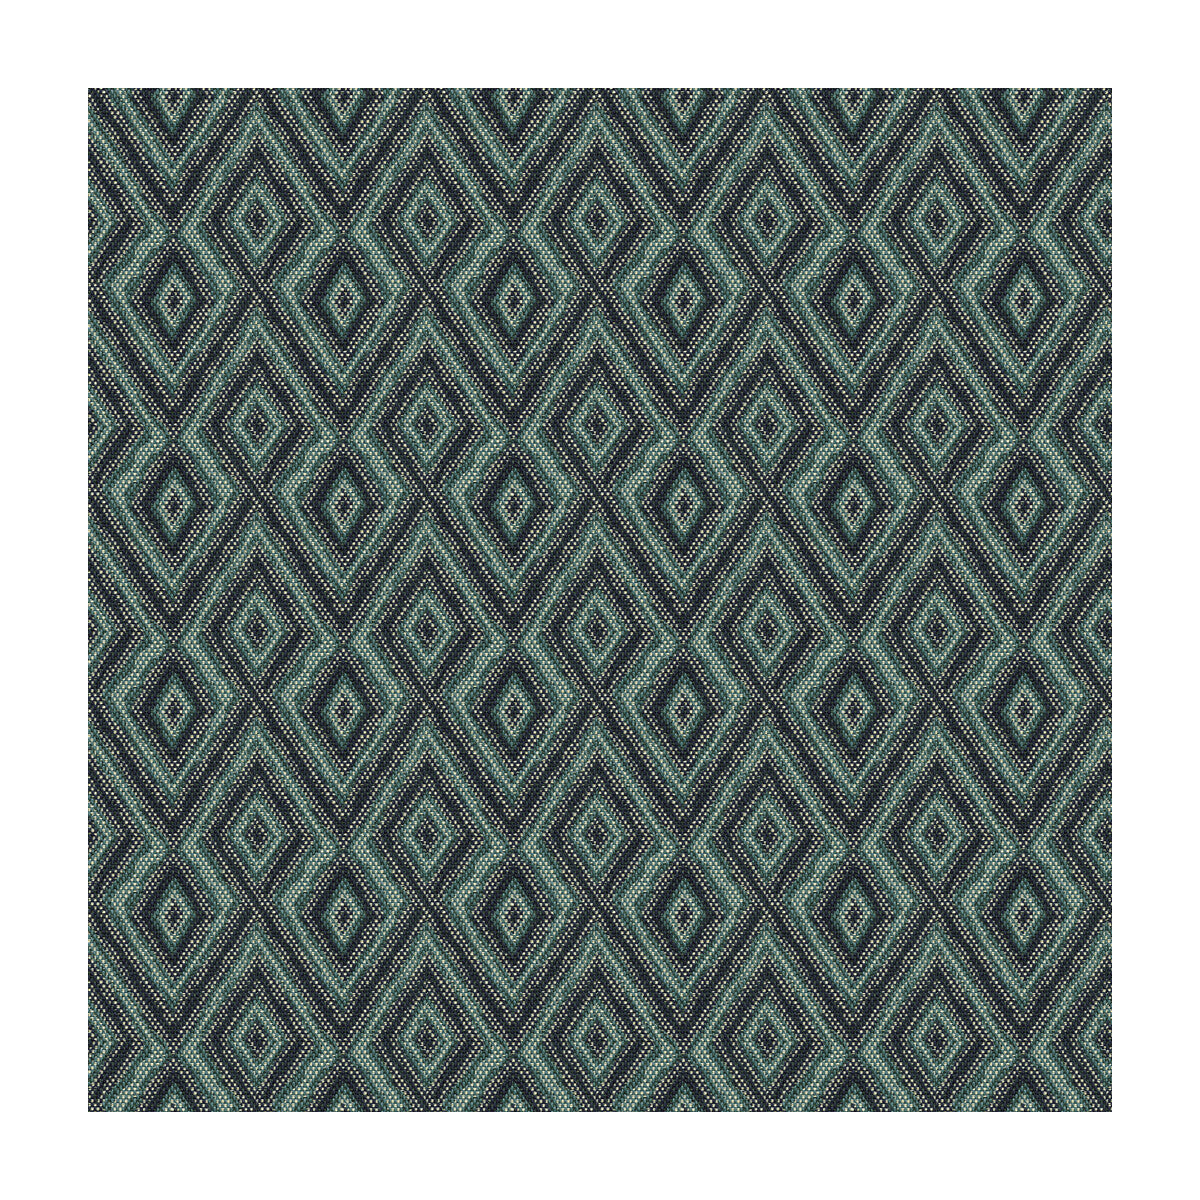 Banati fabric in lake color - pattern 33863.5.0 - by Kravet Contract in the Tanzania J Banks collection